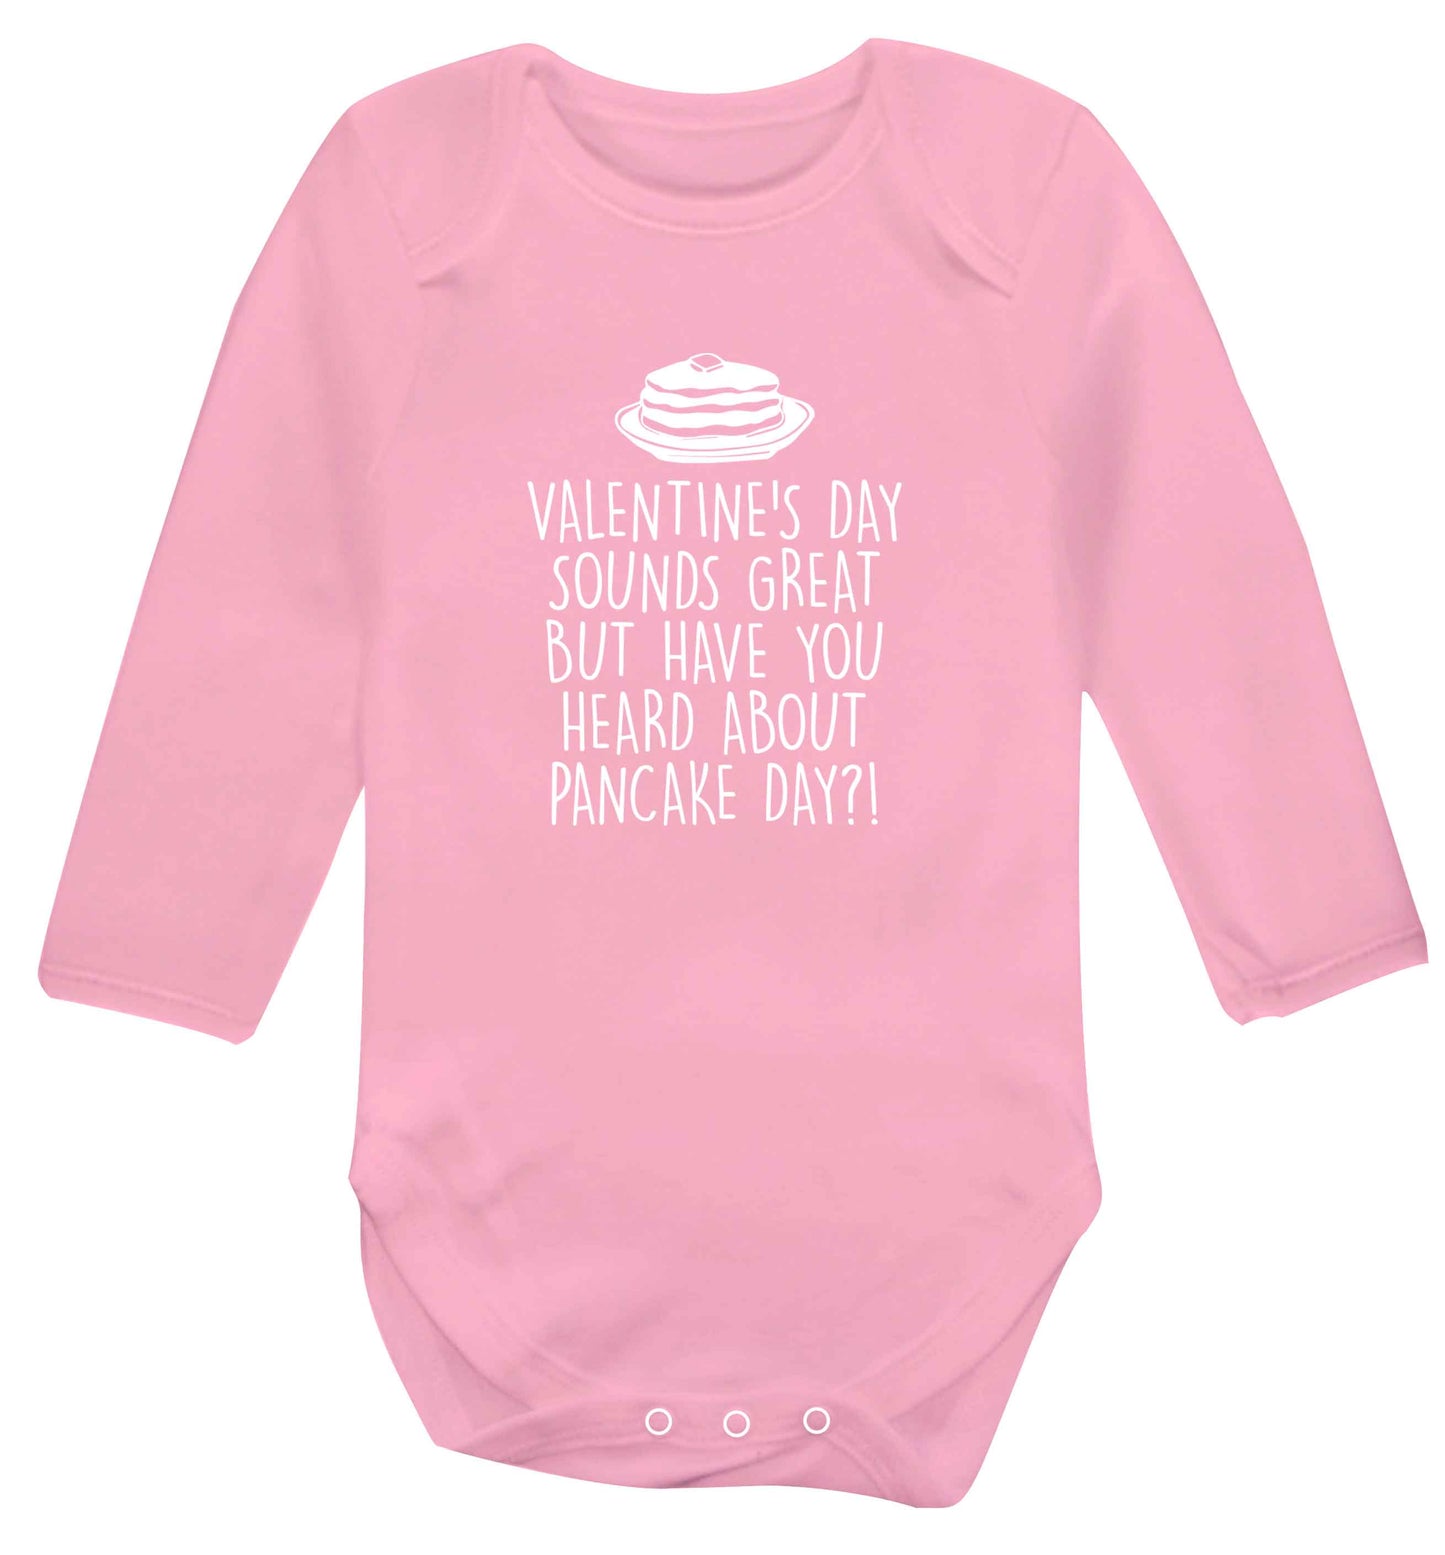 Valentine's day sounds great but have you heard about pancake day?! baby vest long sleeved pale pink 6-12 months